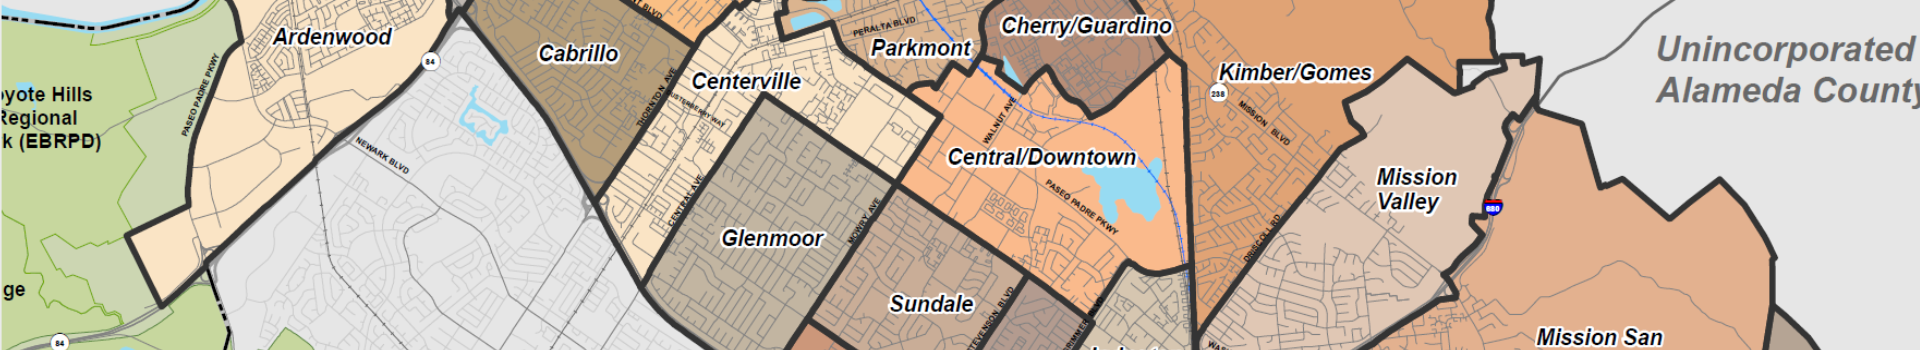 Map of Fremont with labeled neighborhoods including Ardenwood, Cabrillo, Centerville, Glenmoor, Sundale, Central/Downtown, Parkmont, Cherry/Guardion, Kimber/Gomes, Mission Valley and Mission San Jose. Also labels Unincorporated Alameda County